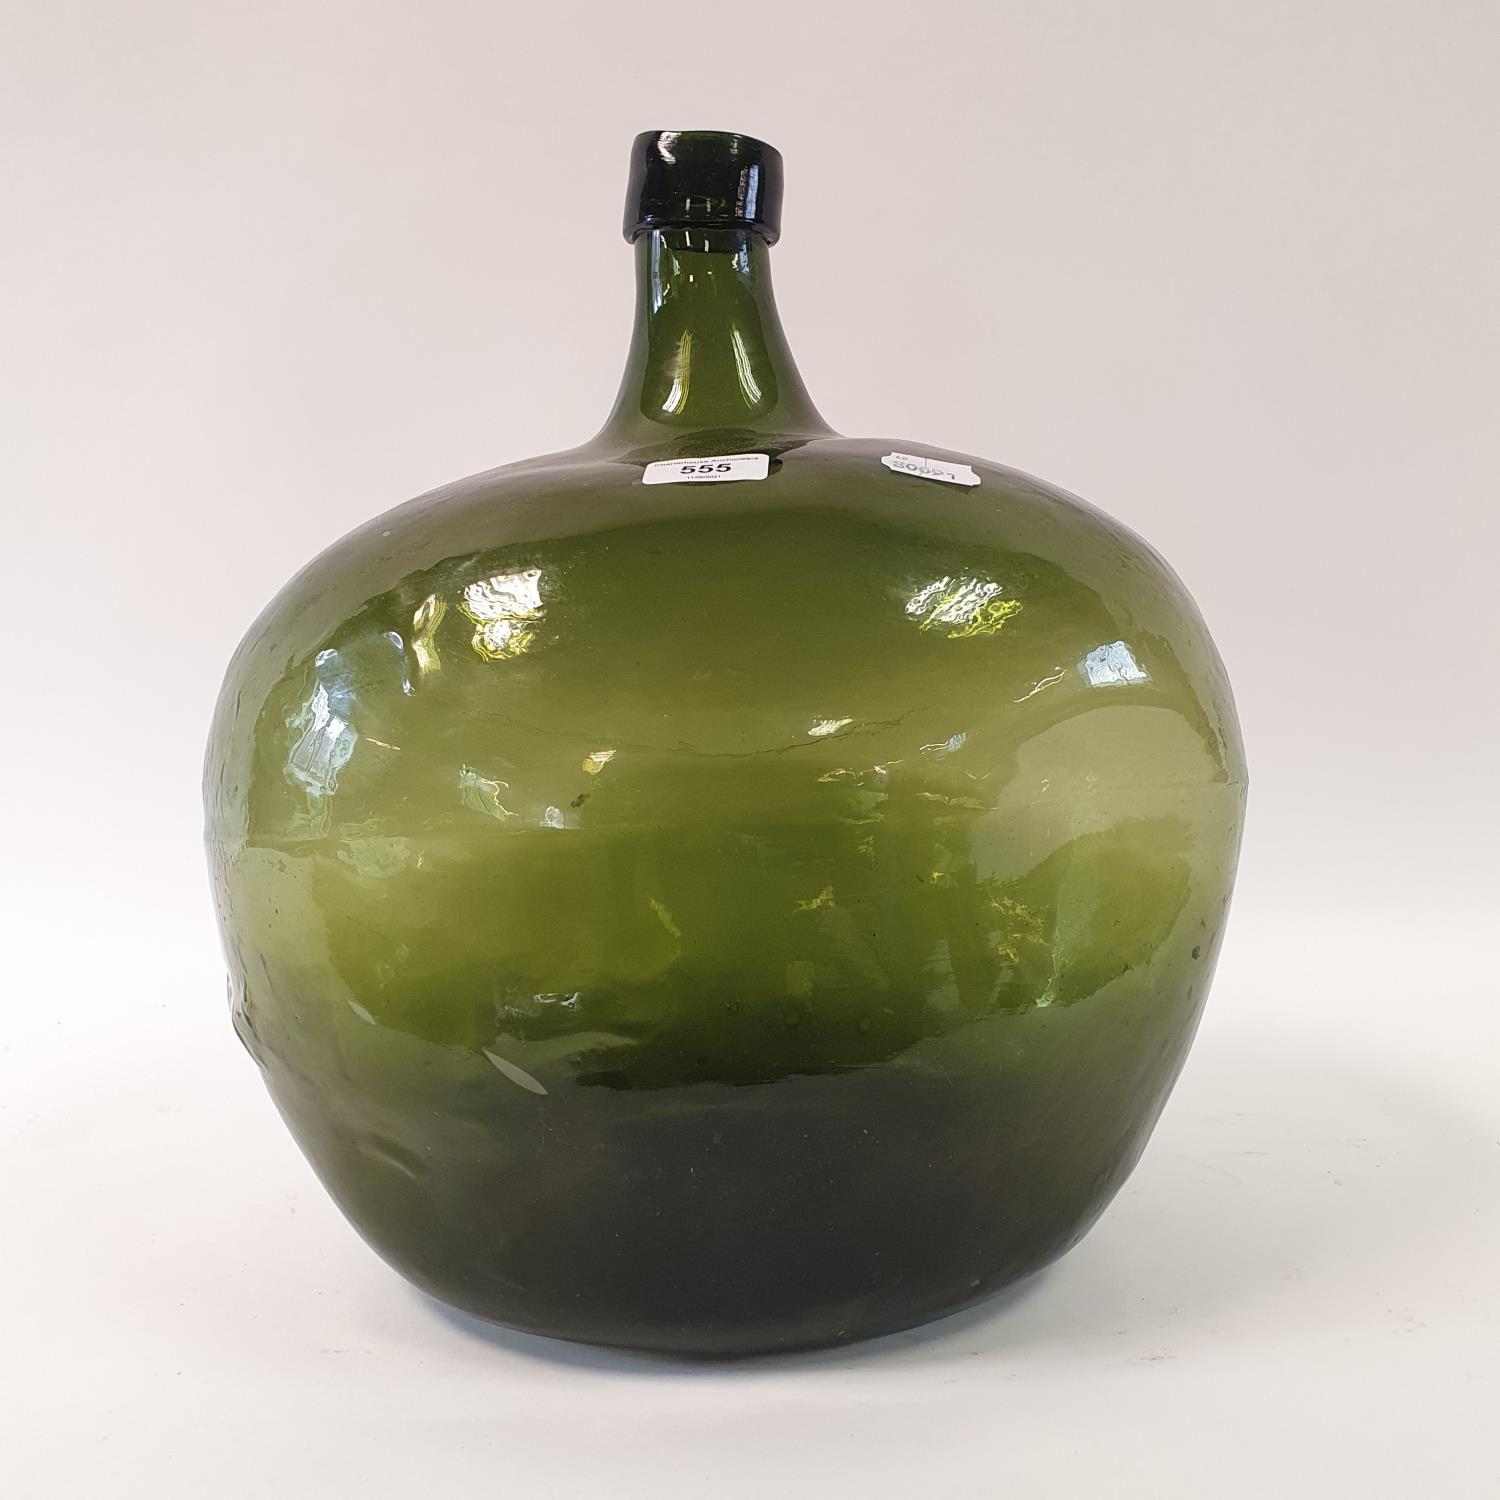 A large green glass bottle, 44 cm high - Image 2 of 2